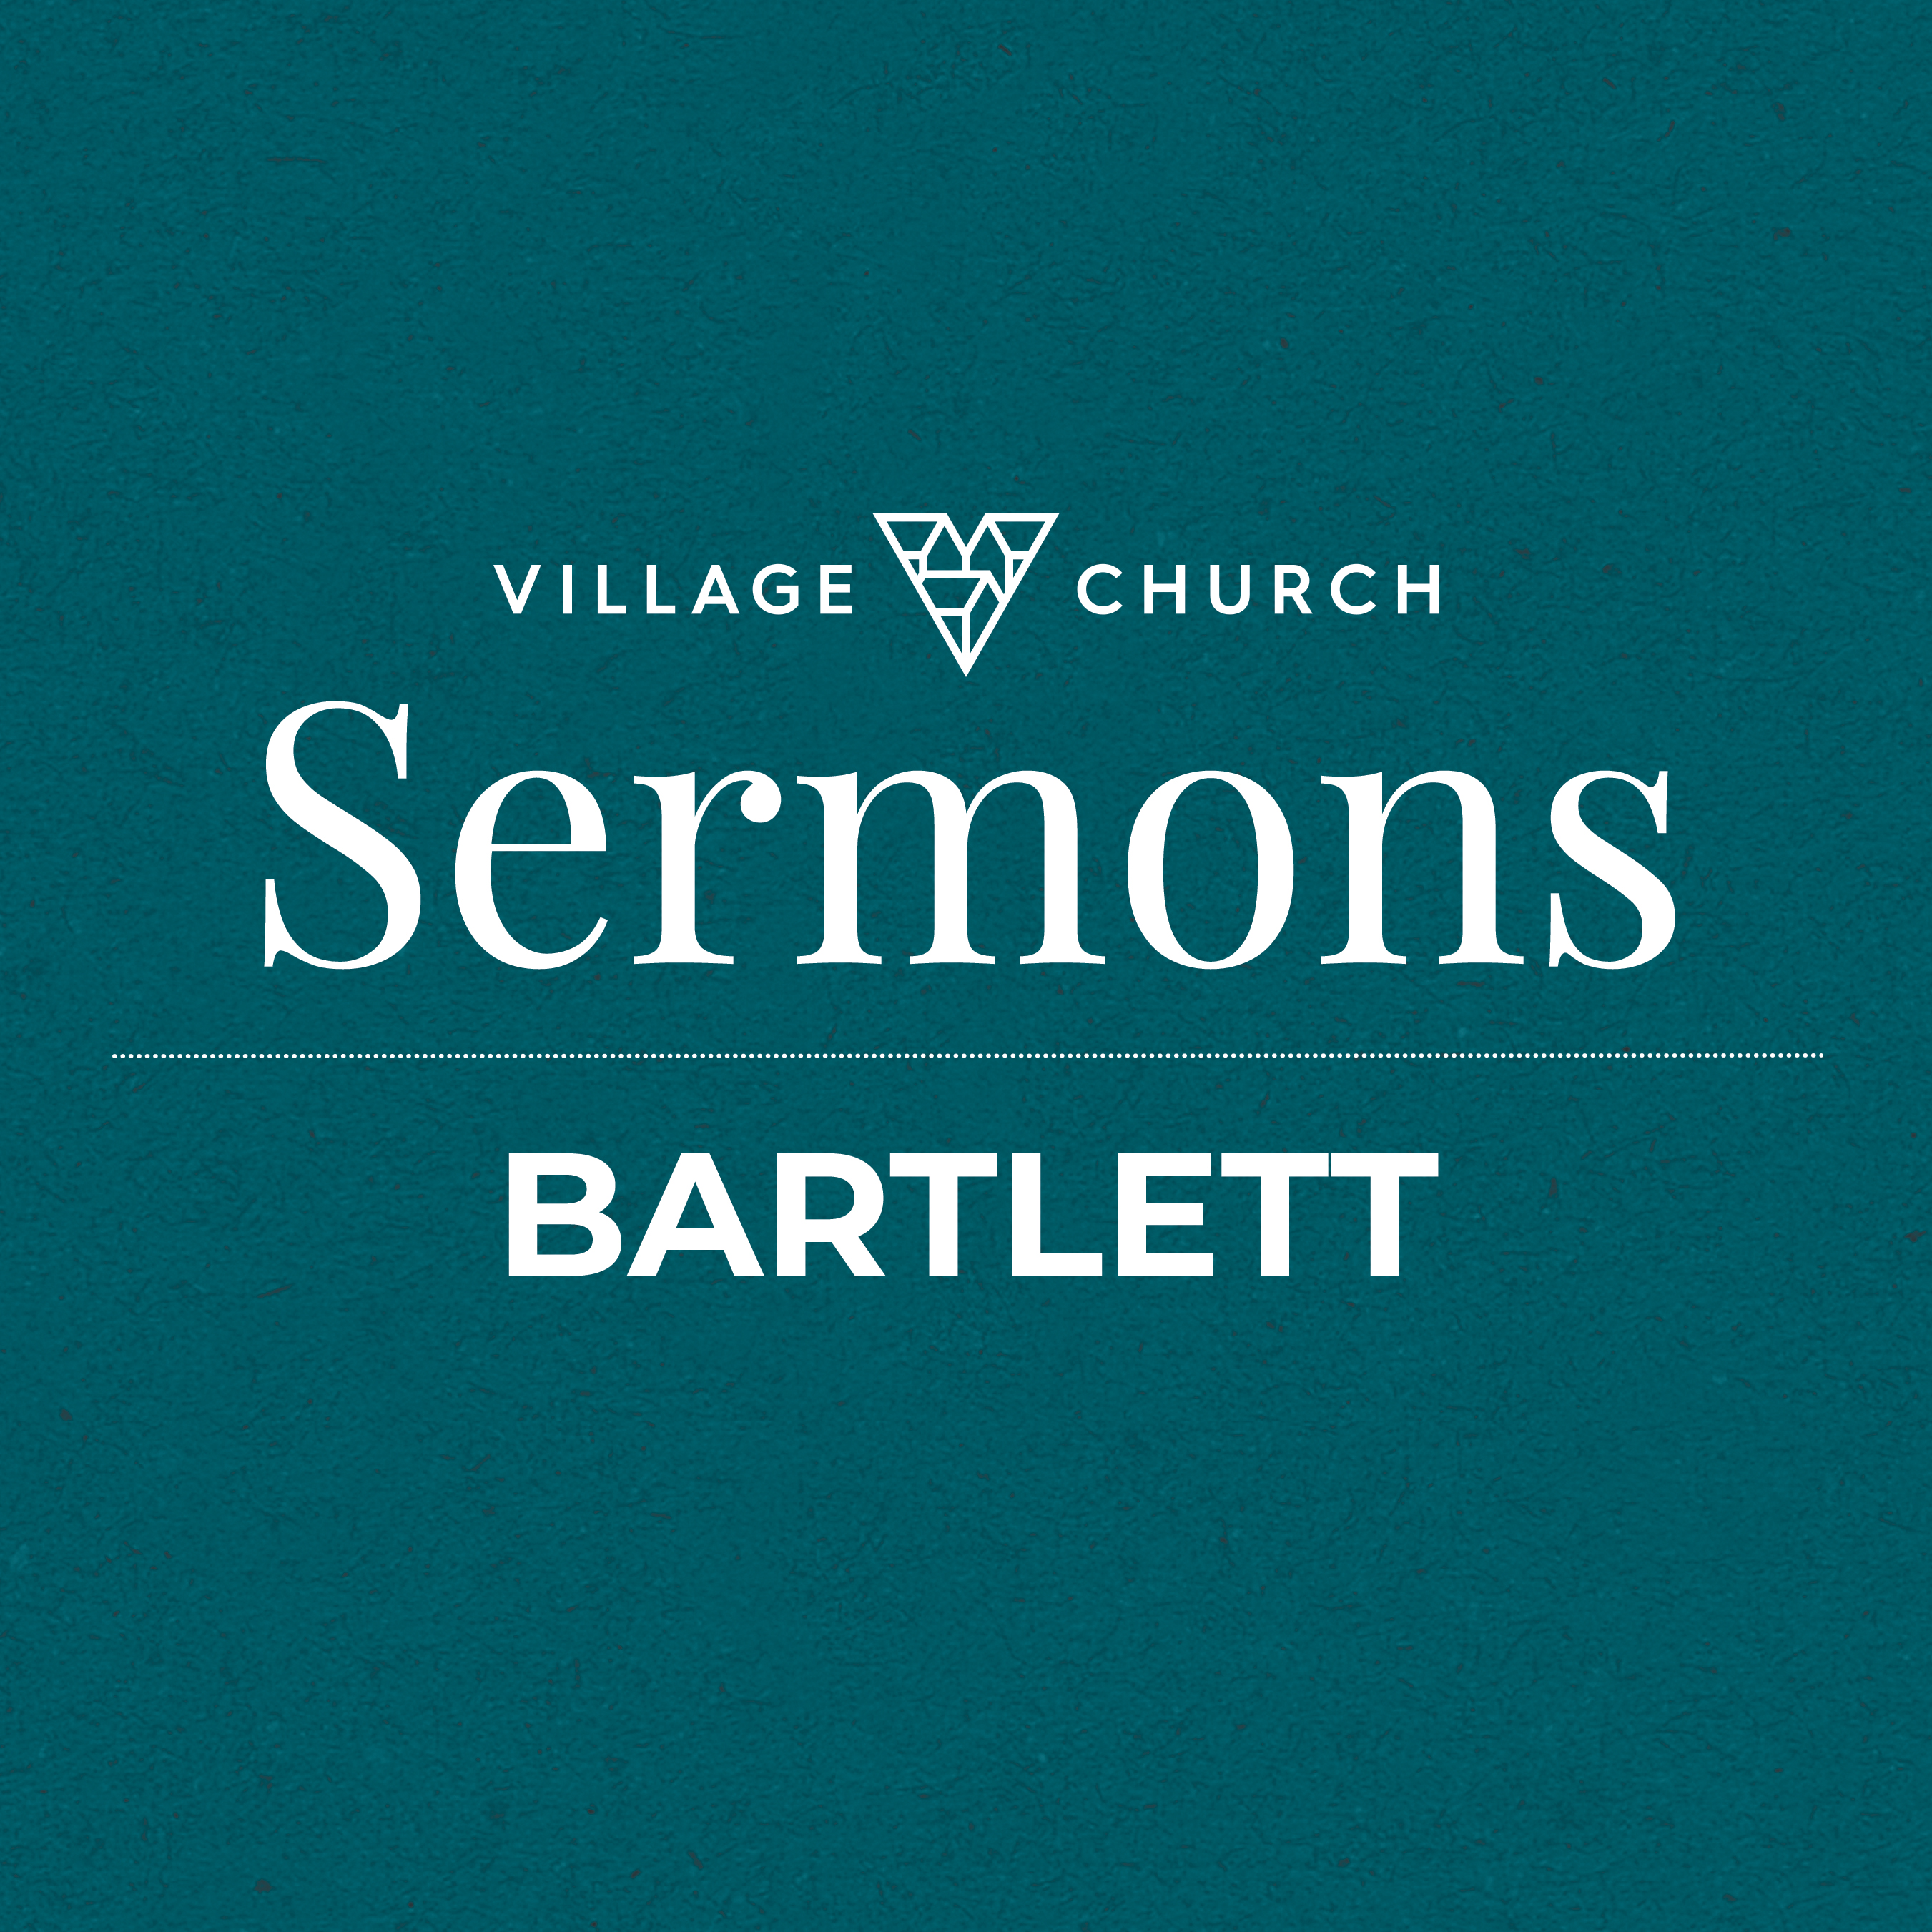 Sermon Q&A: What Do I Do If the Bible Asks Me to Do Something That Doesn't Feel Right?